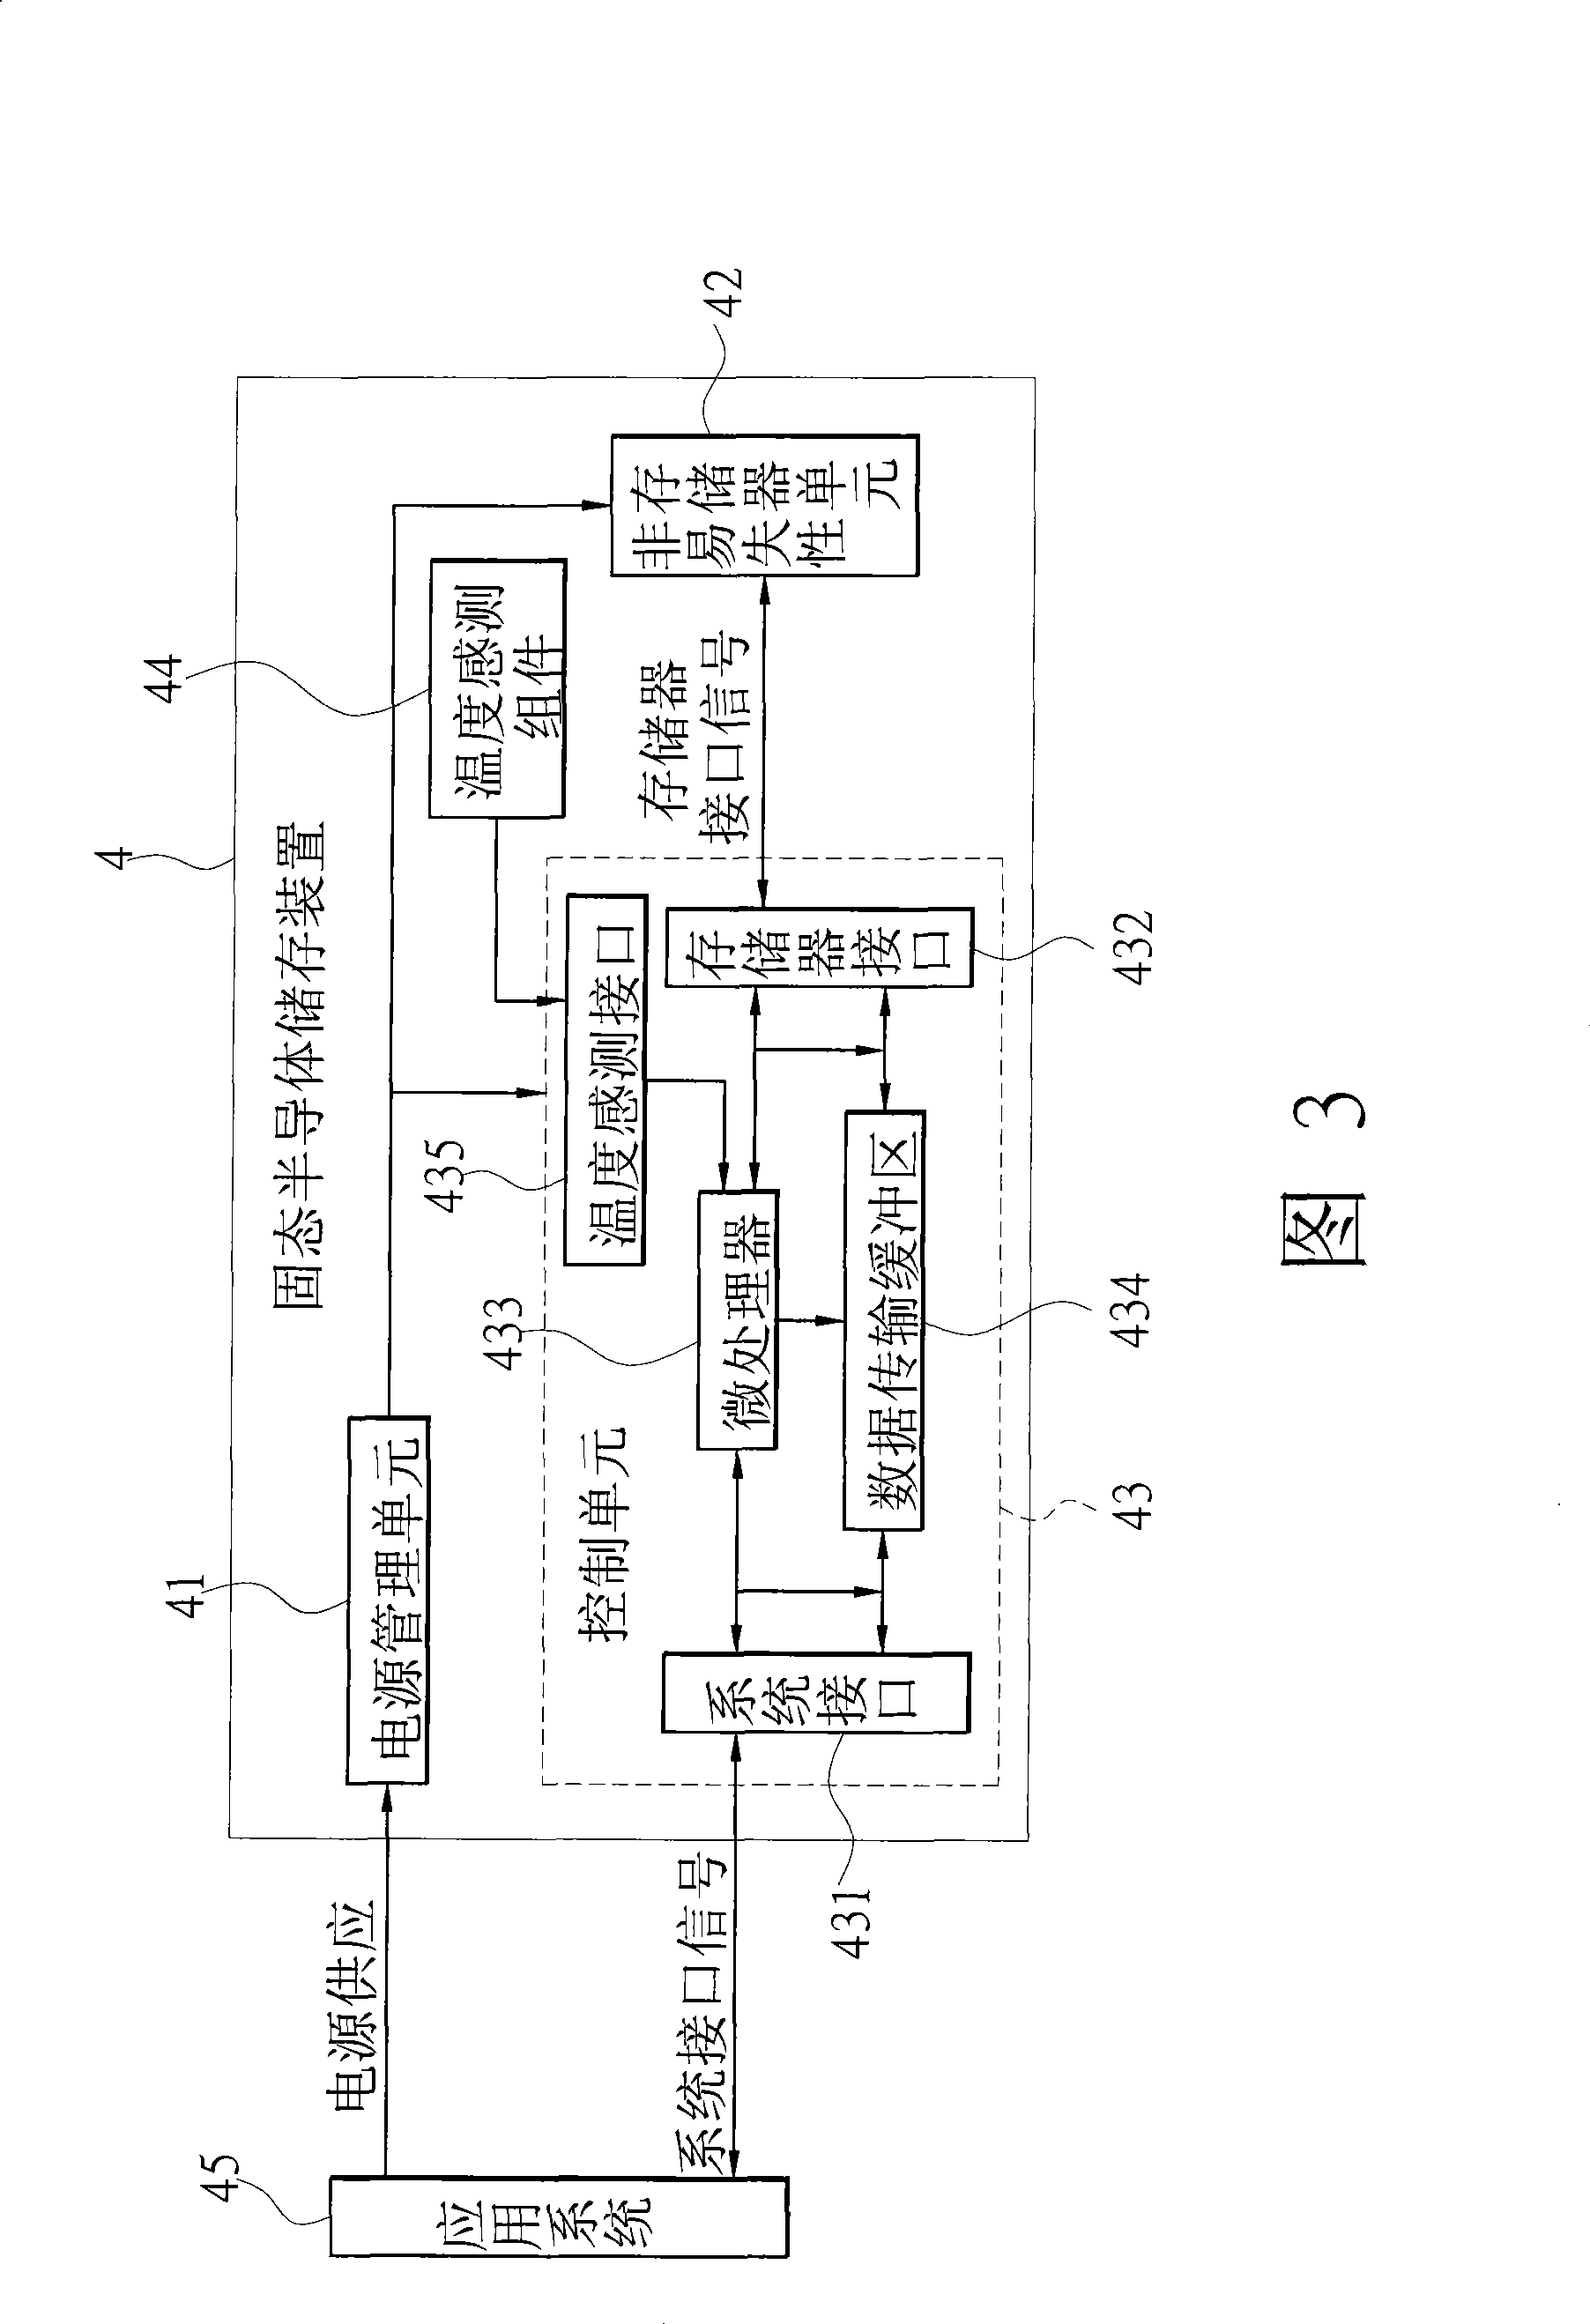 Solid state semiconductor memory mechanism and its application system and control assembly